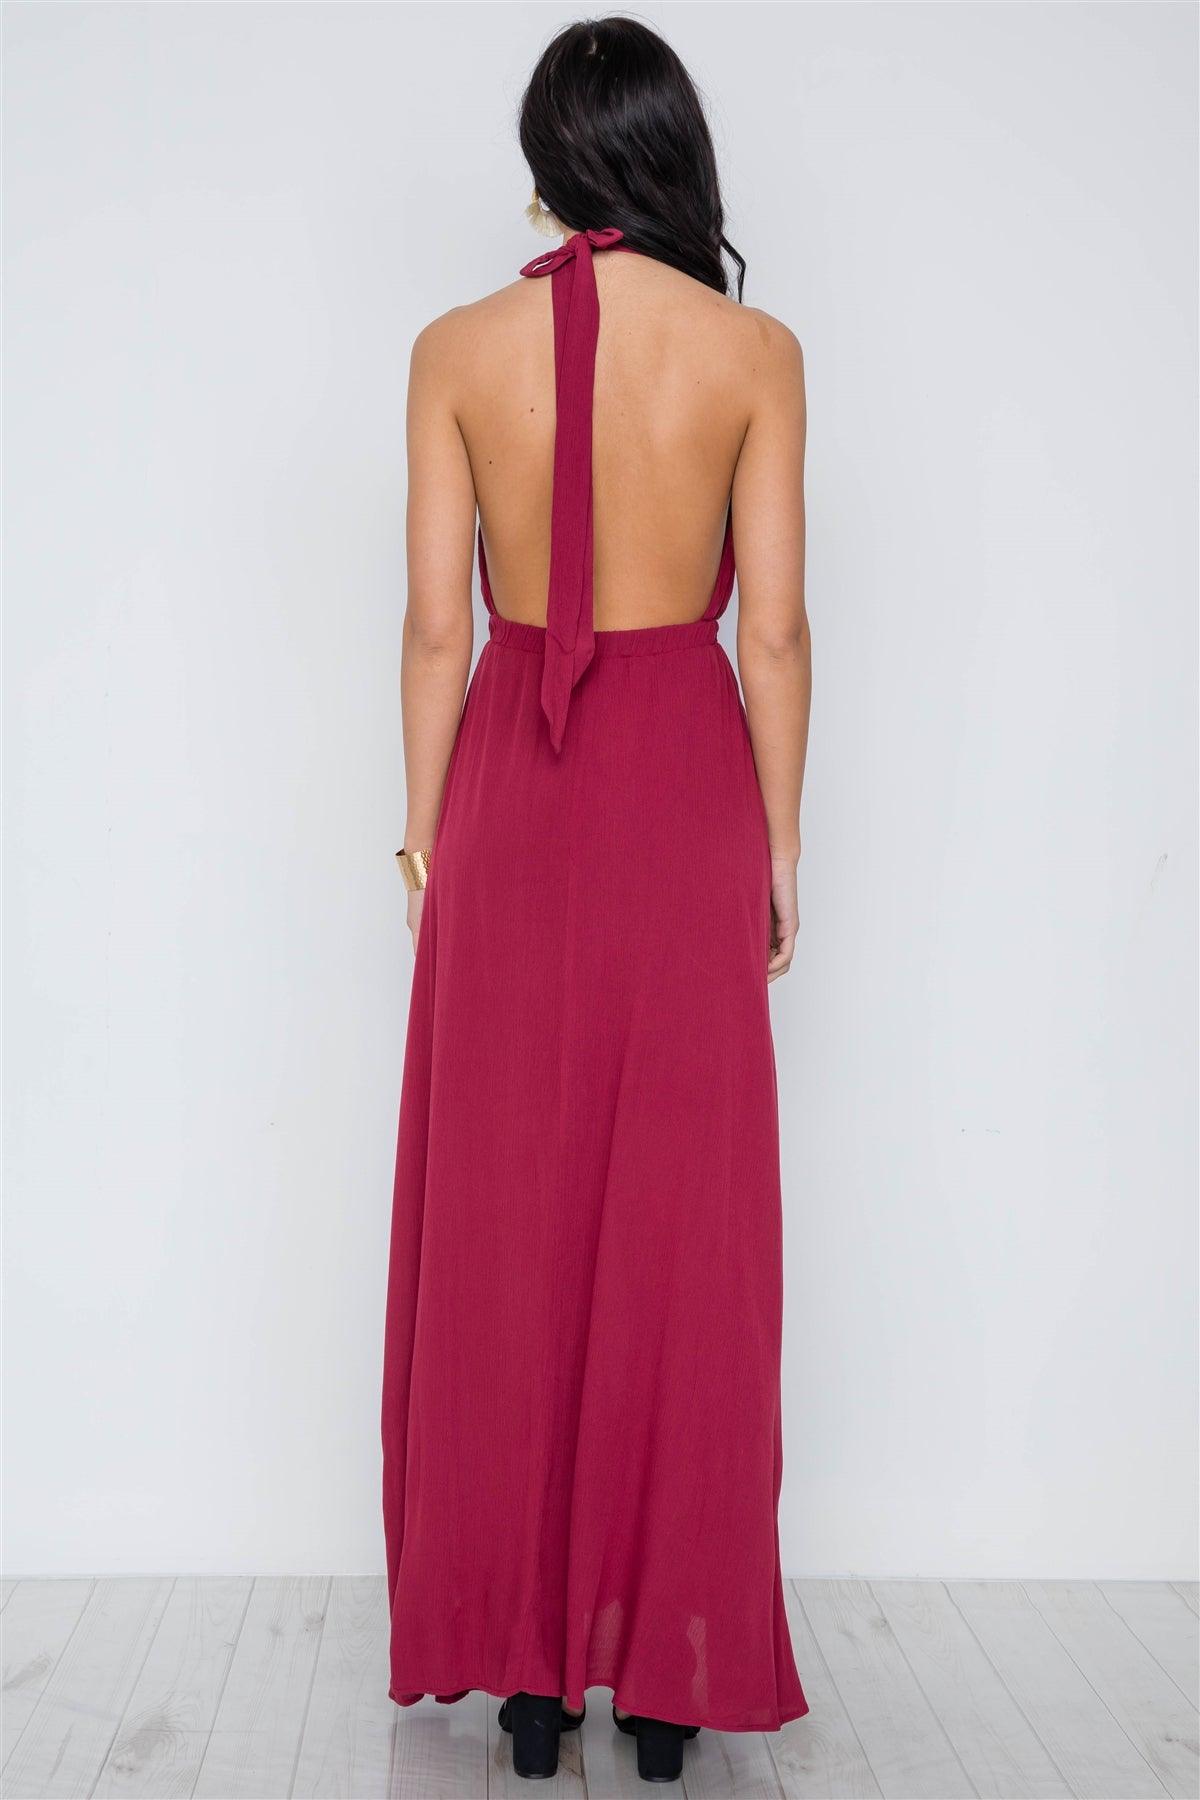 Burgundy Plunging Open Back Solid Maxi Dress /3-2-1